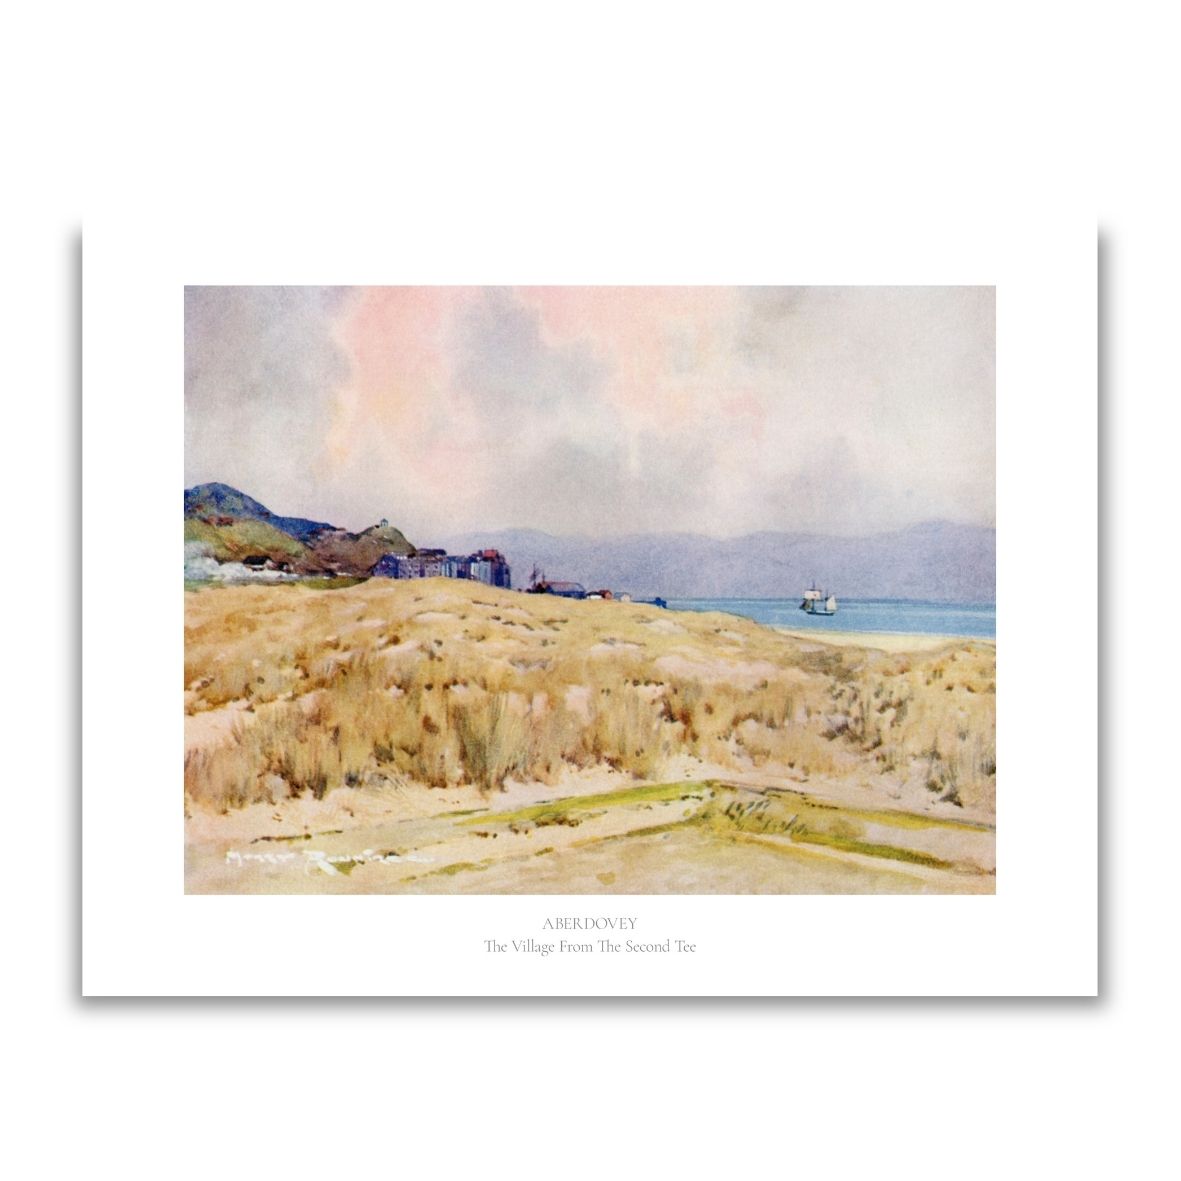 Aberdovey by Harry Rountree print with text